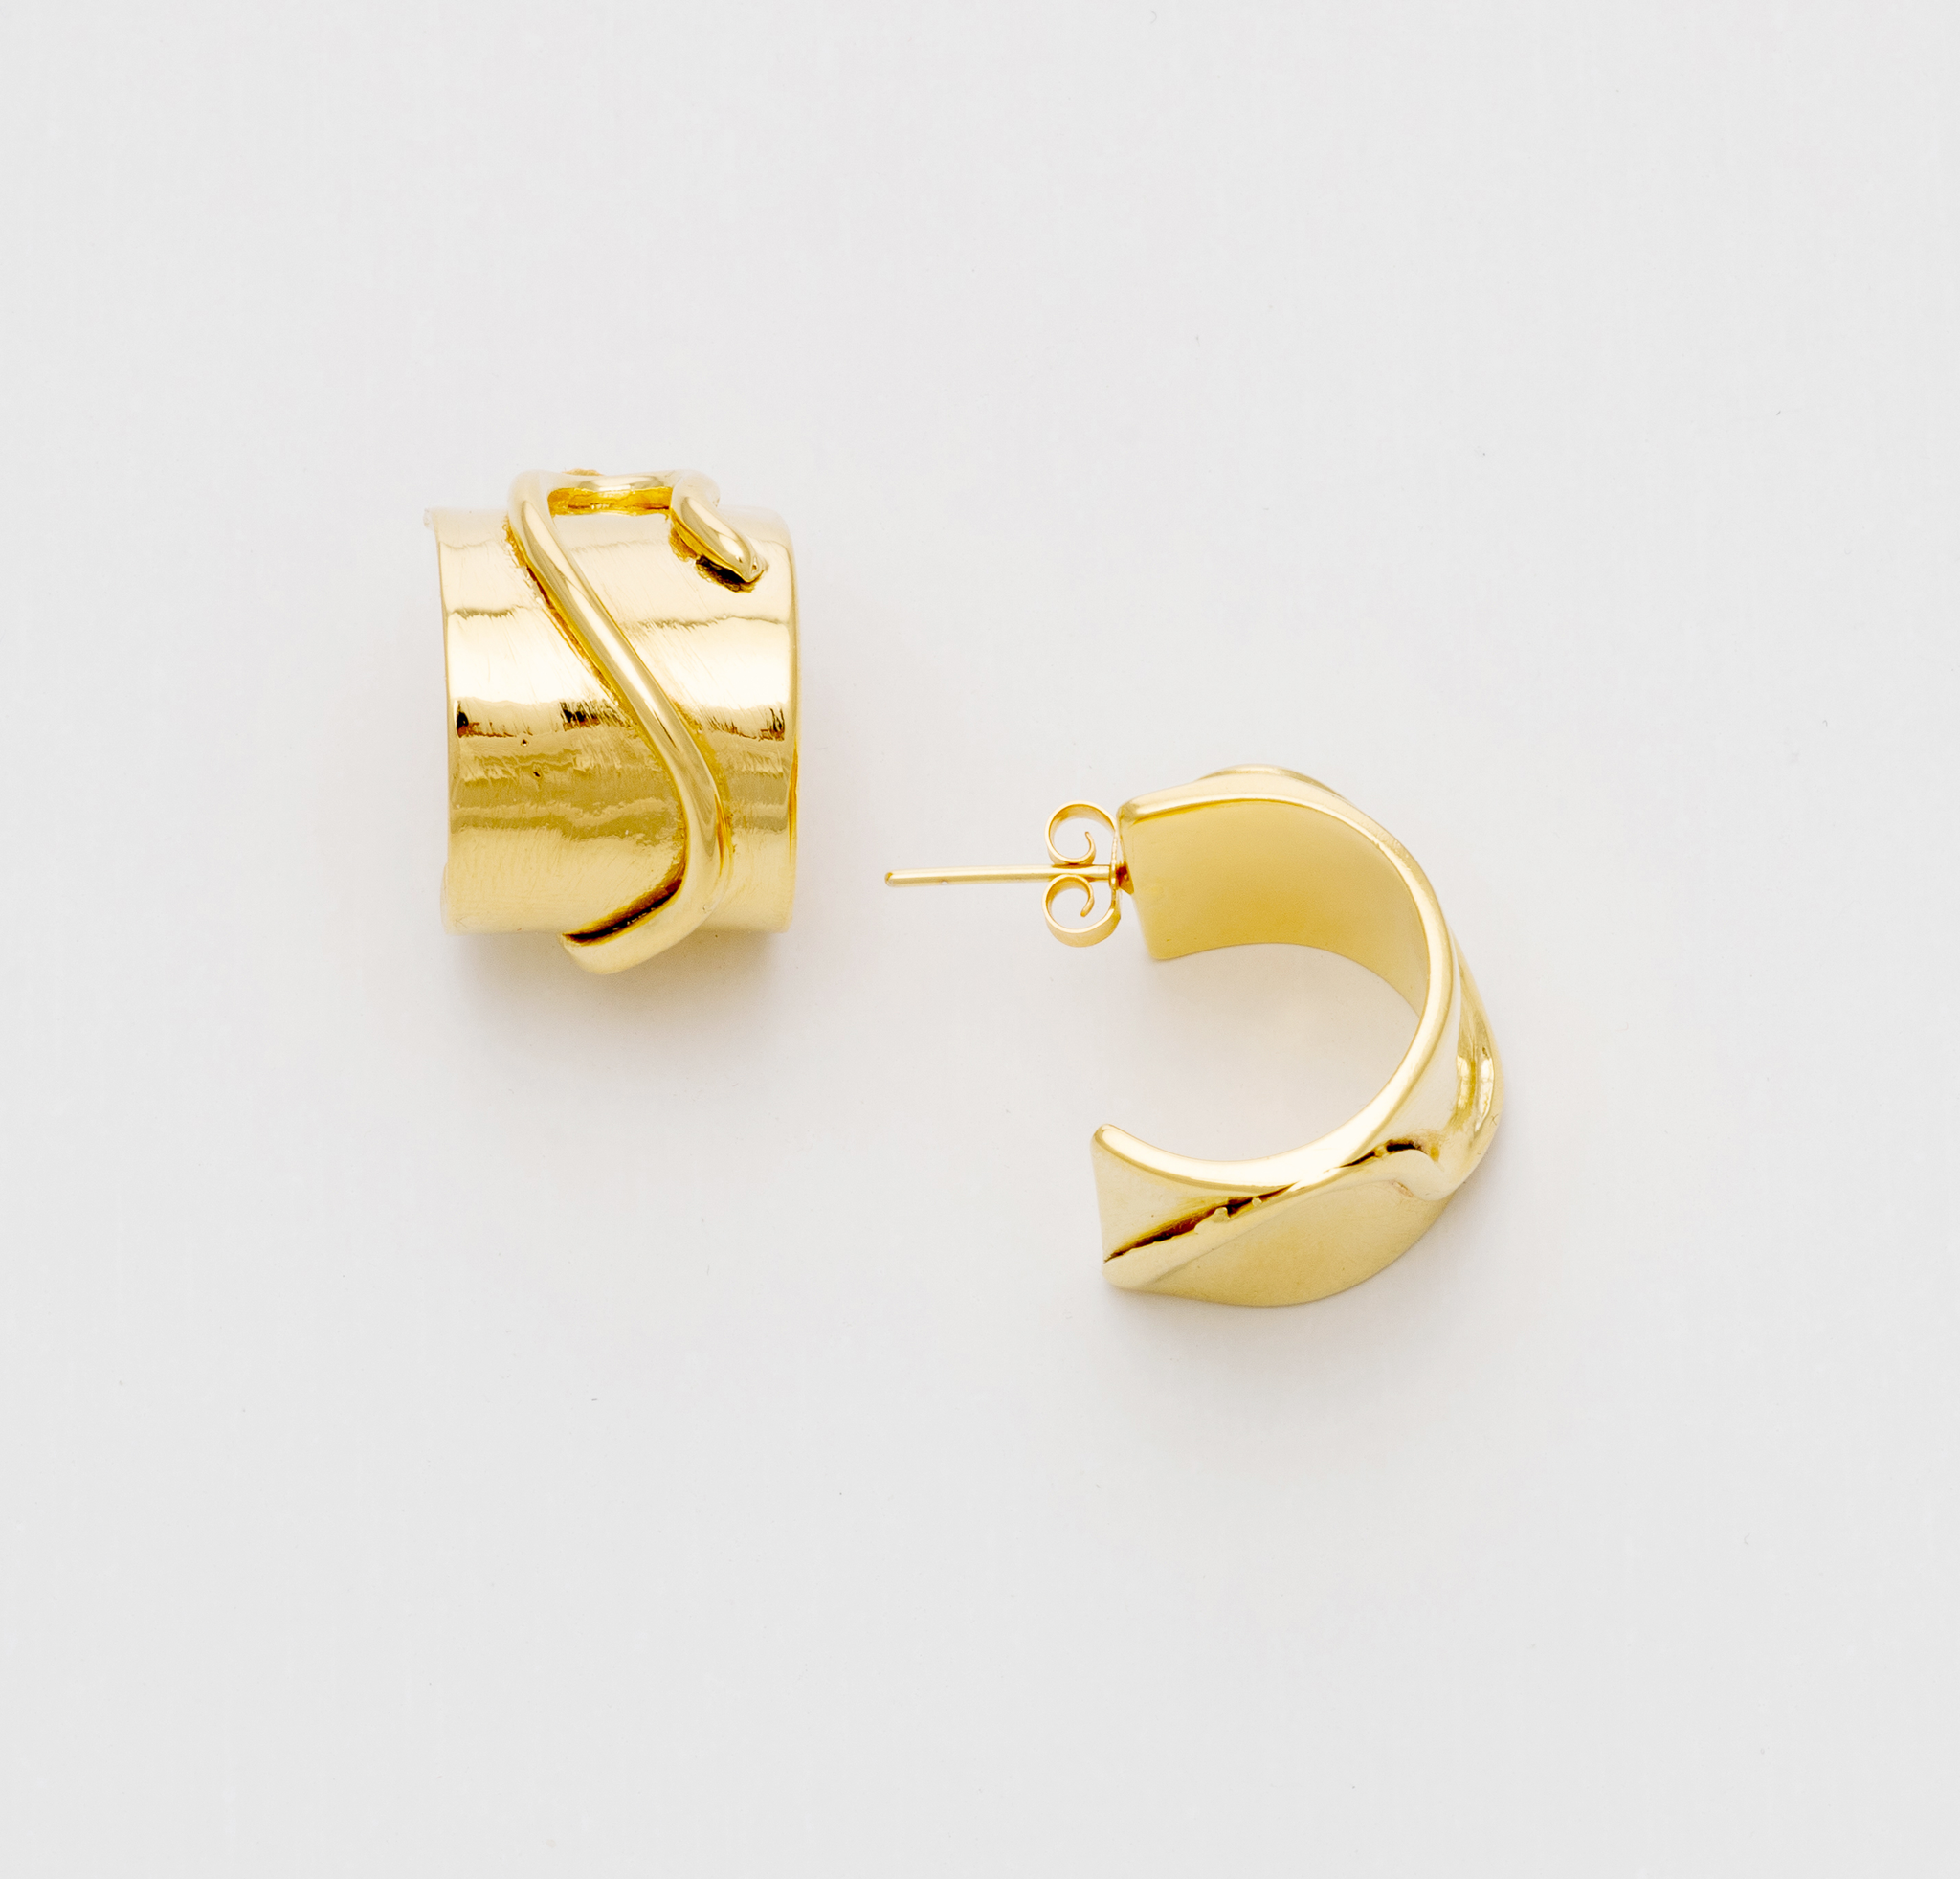 ALEXANDRIA COE X YSSO: THE ABSTRACTION EARRINGS